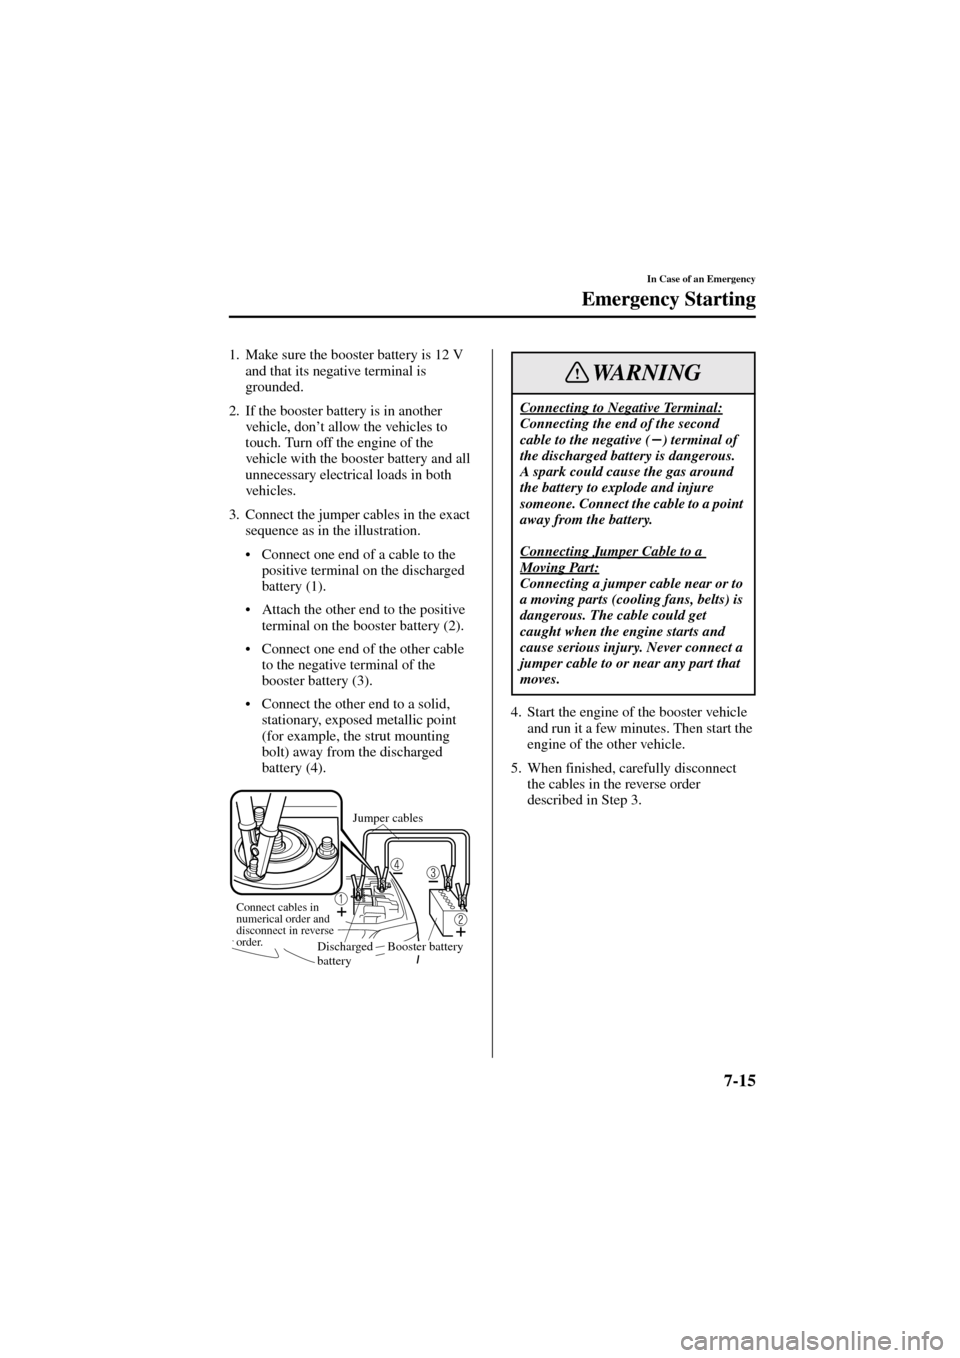 MAZDA MODEL 6 2004  Owners Manual (in English) 7-15
In Case of an Emergency
Emergency Starting
Form No. 8R29-EA-02I
1. Make sure the booster battery is 12 V 
and that its negative terminal is 
grounded.
2. If the booster battery is in another 
veh